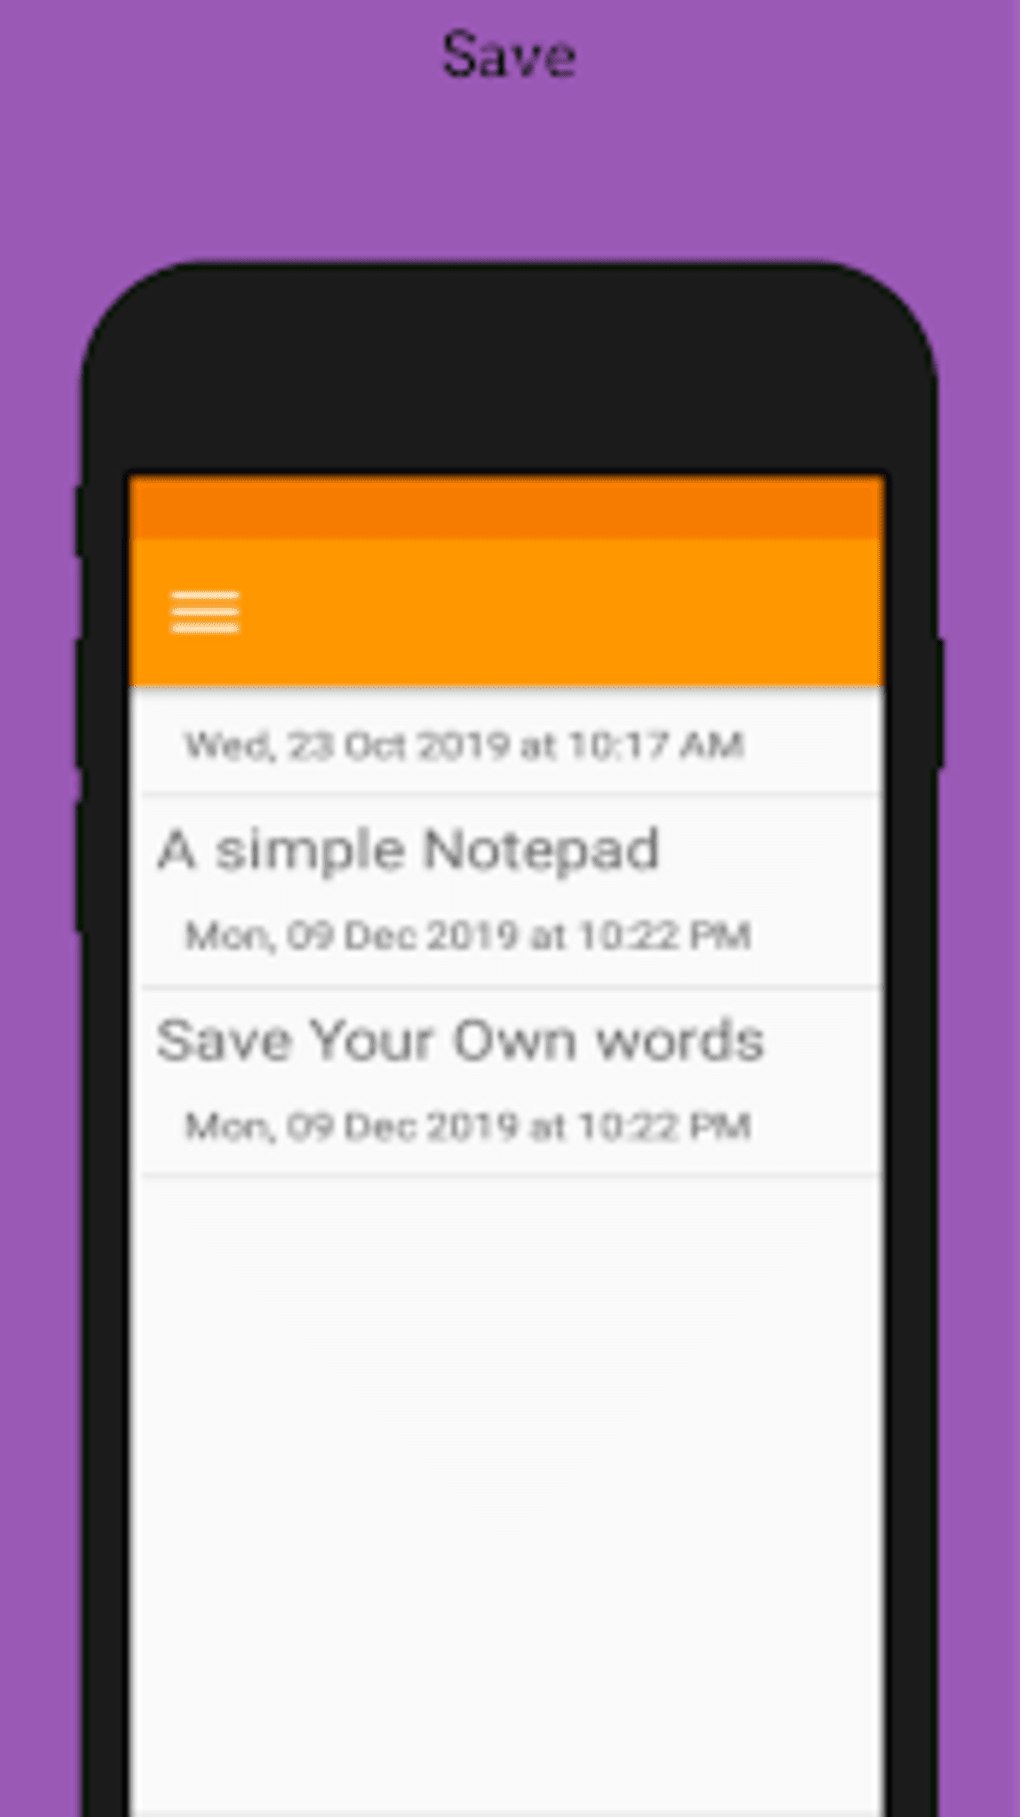 simple notepad apk download